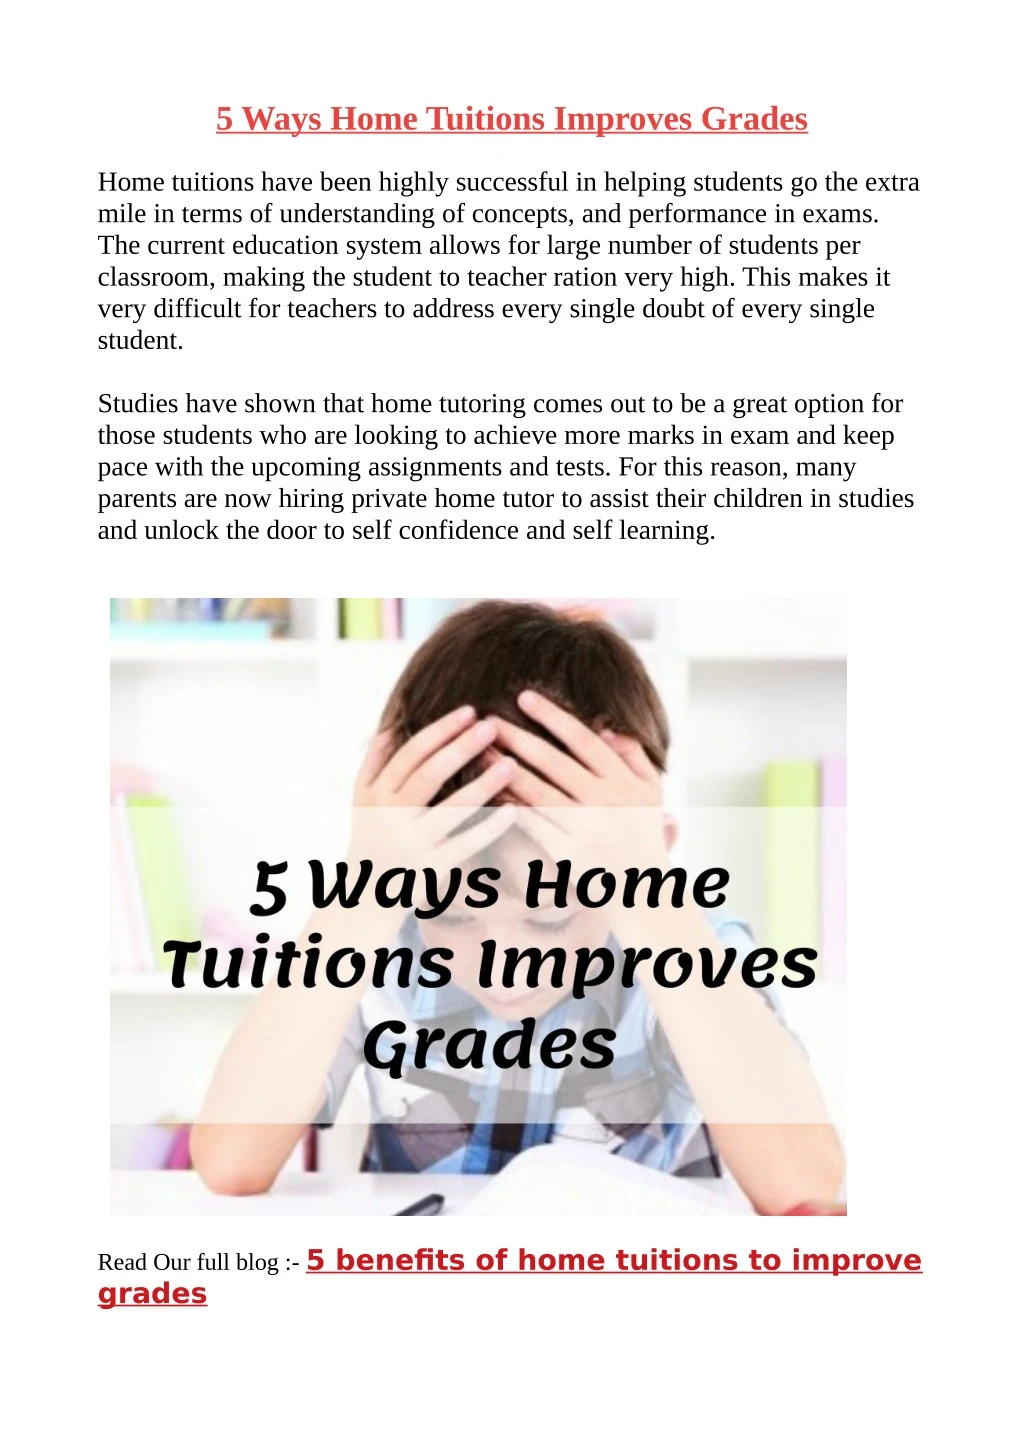 5 ways home tuitions improves grades